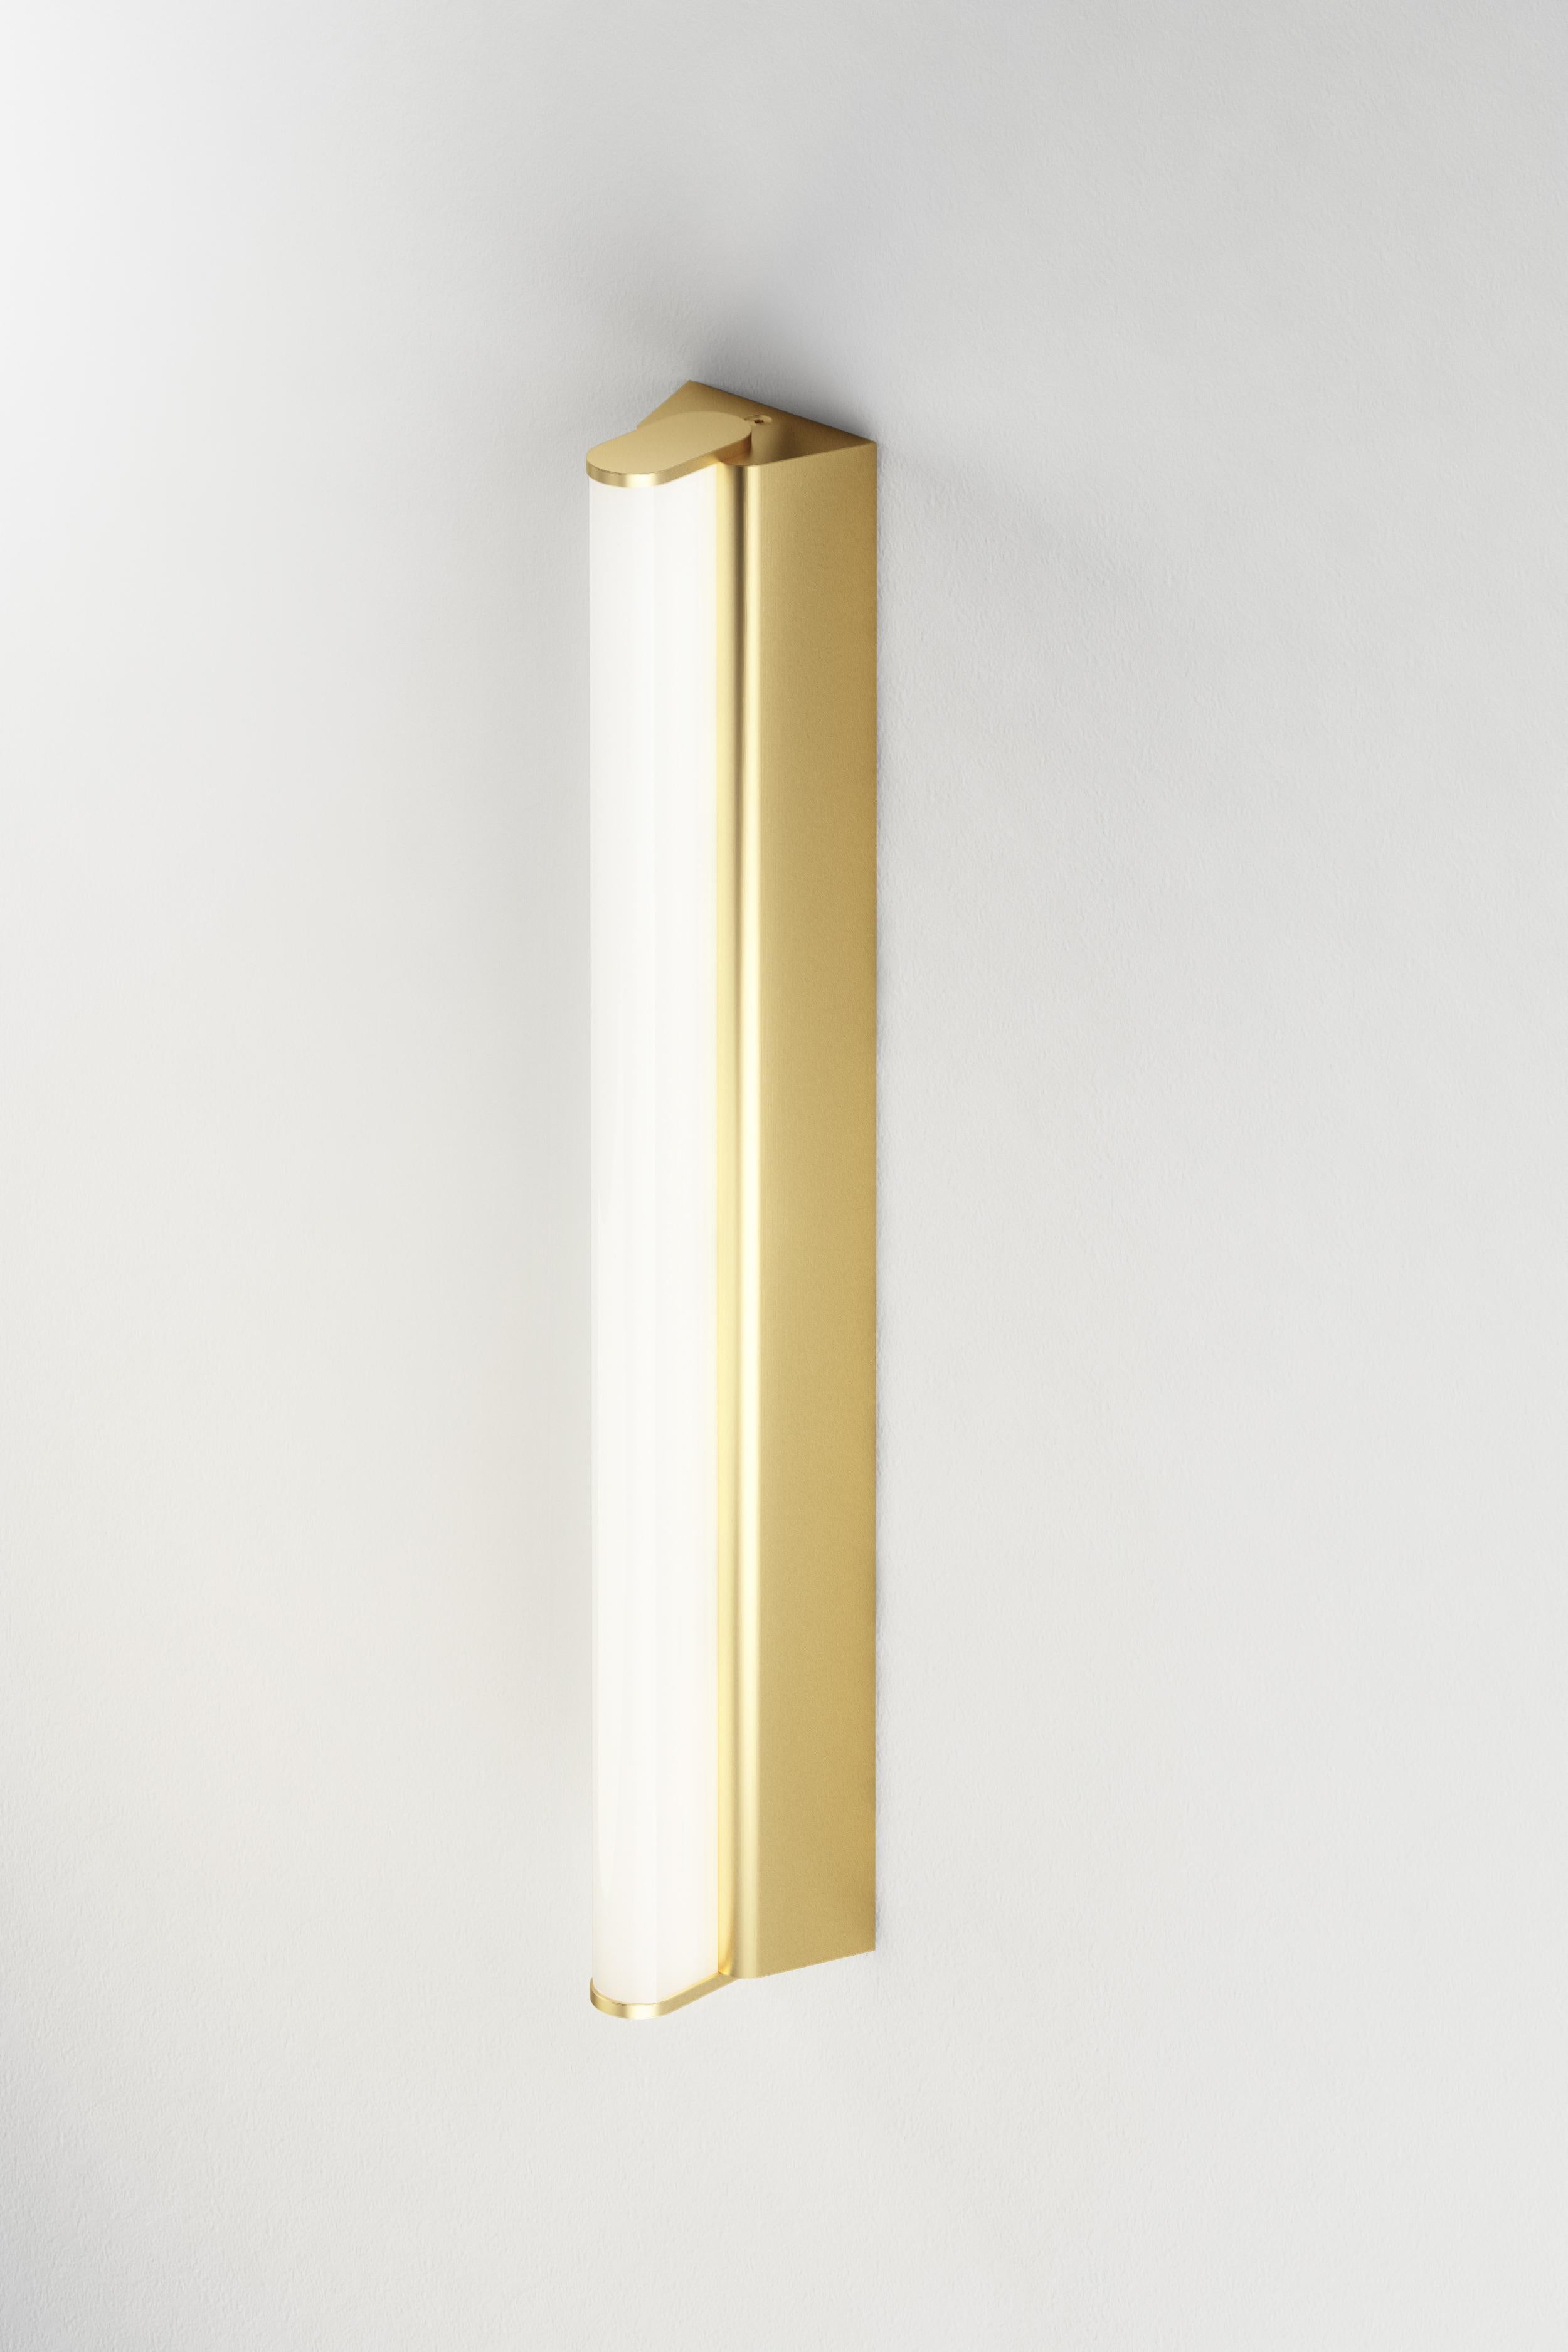 IP metrop 325 satin brass wall light by Emilie Cathelineau
Dimensions: D 32.5 x W 5 X H 4.5 cm
Materials: solid brass, satin brass, LED, polycarbonate.
Others finishes and dimensions are available. 

All our lamps can be wired according to each